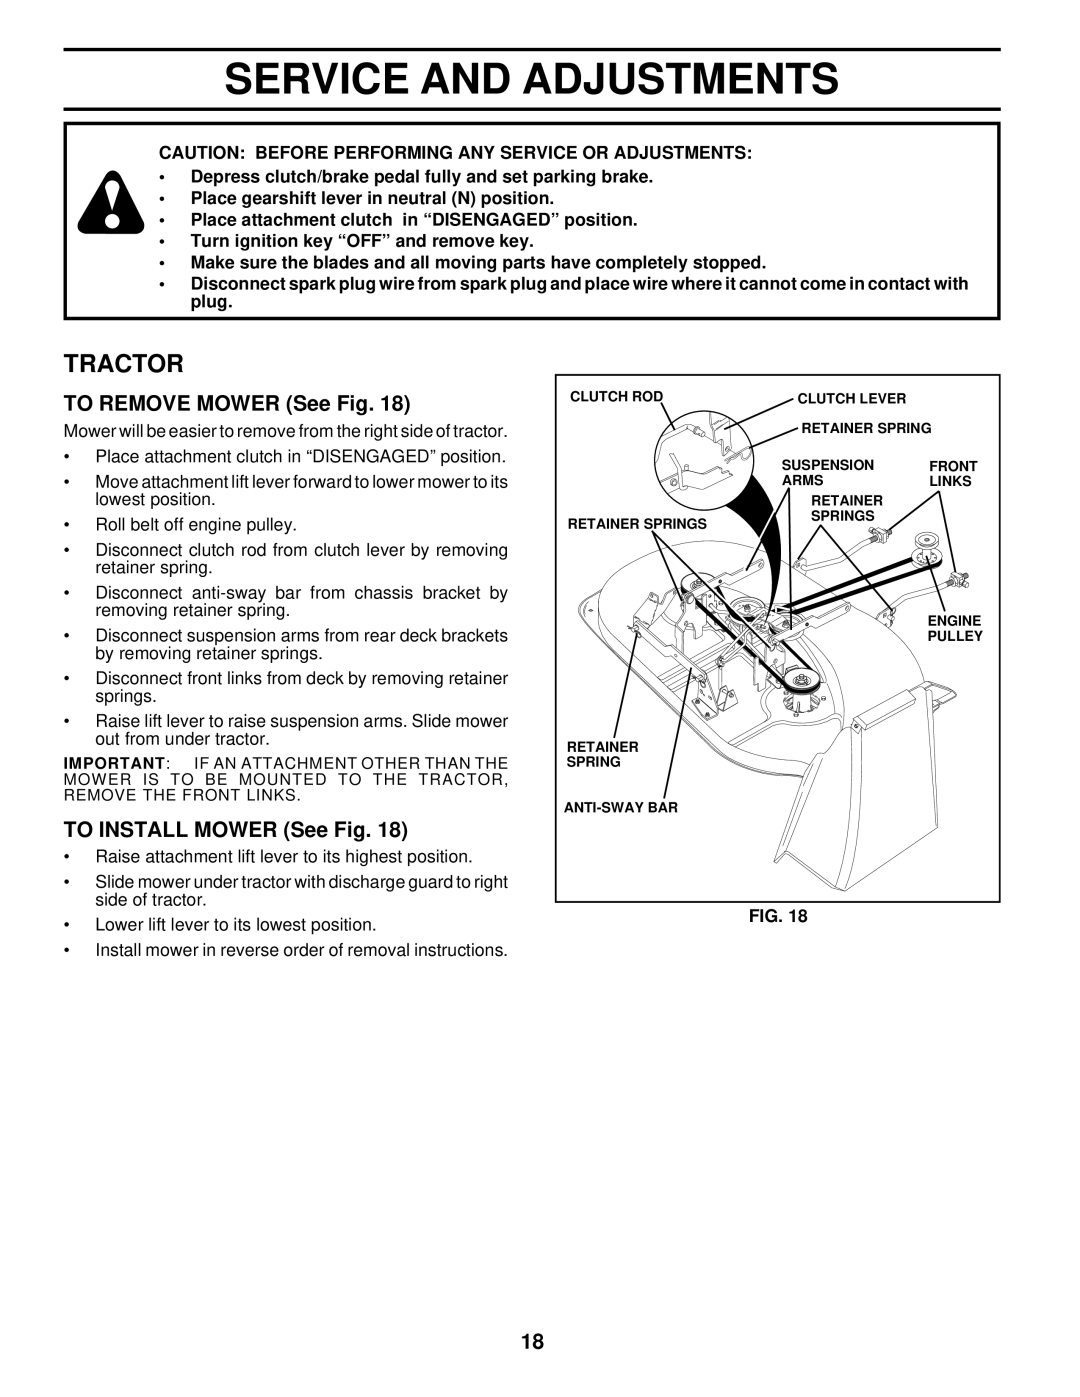 Husqvarna LT120 owner manual Service And Adjustments, Tractor, TO REMOVE MOWER See Fig, TO INSTALL MOWER See Fig 